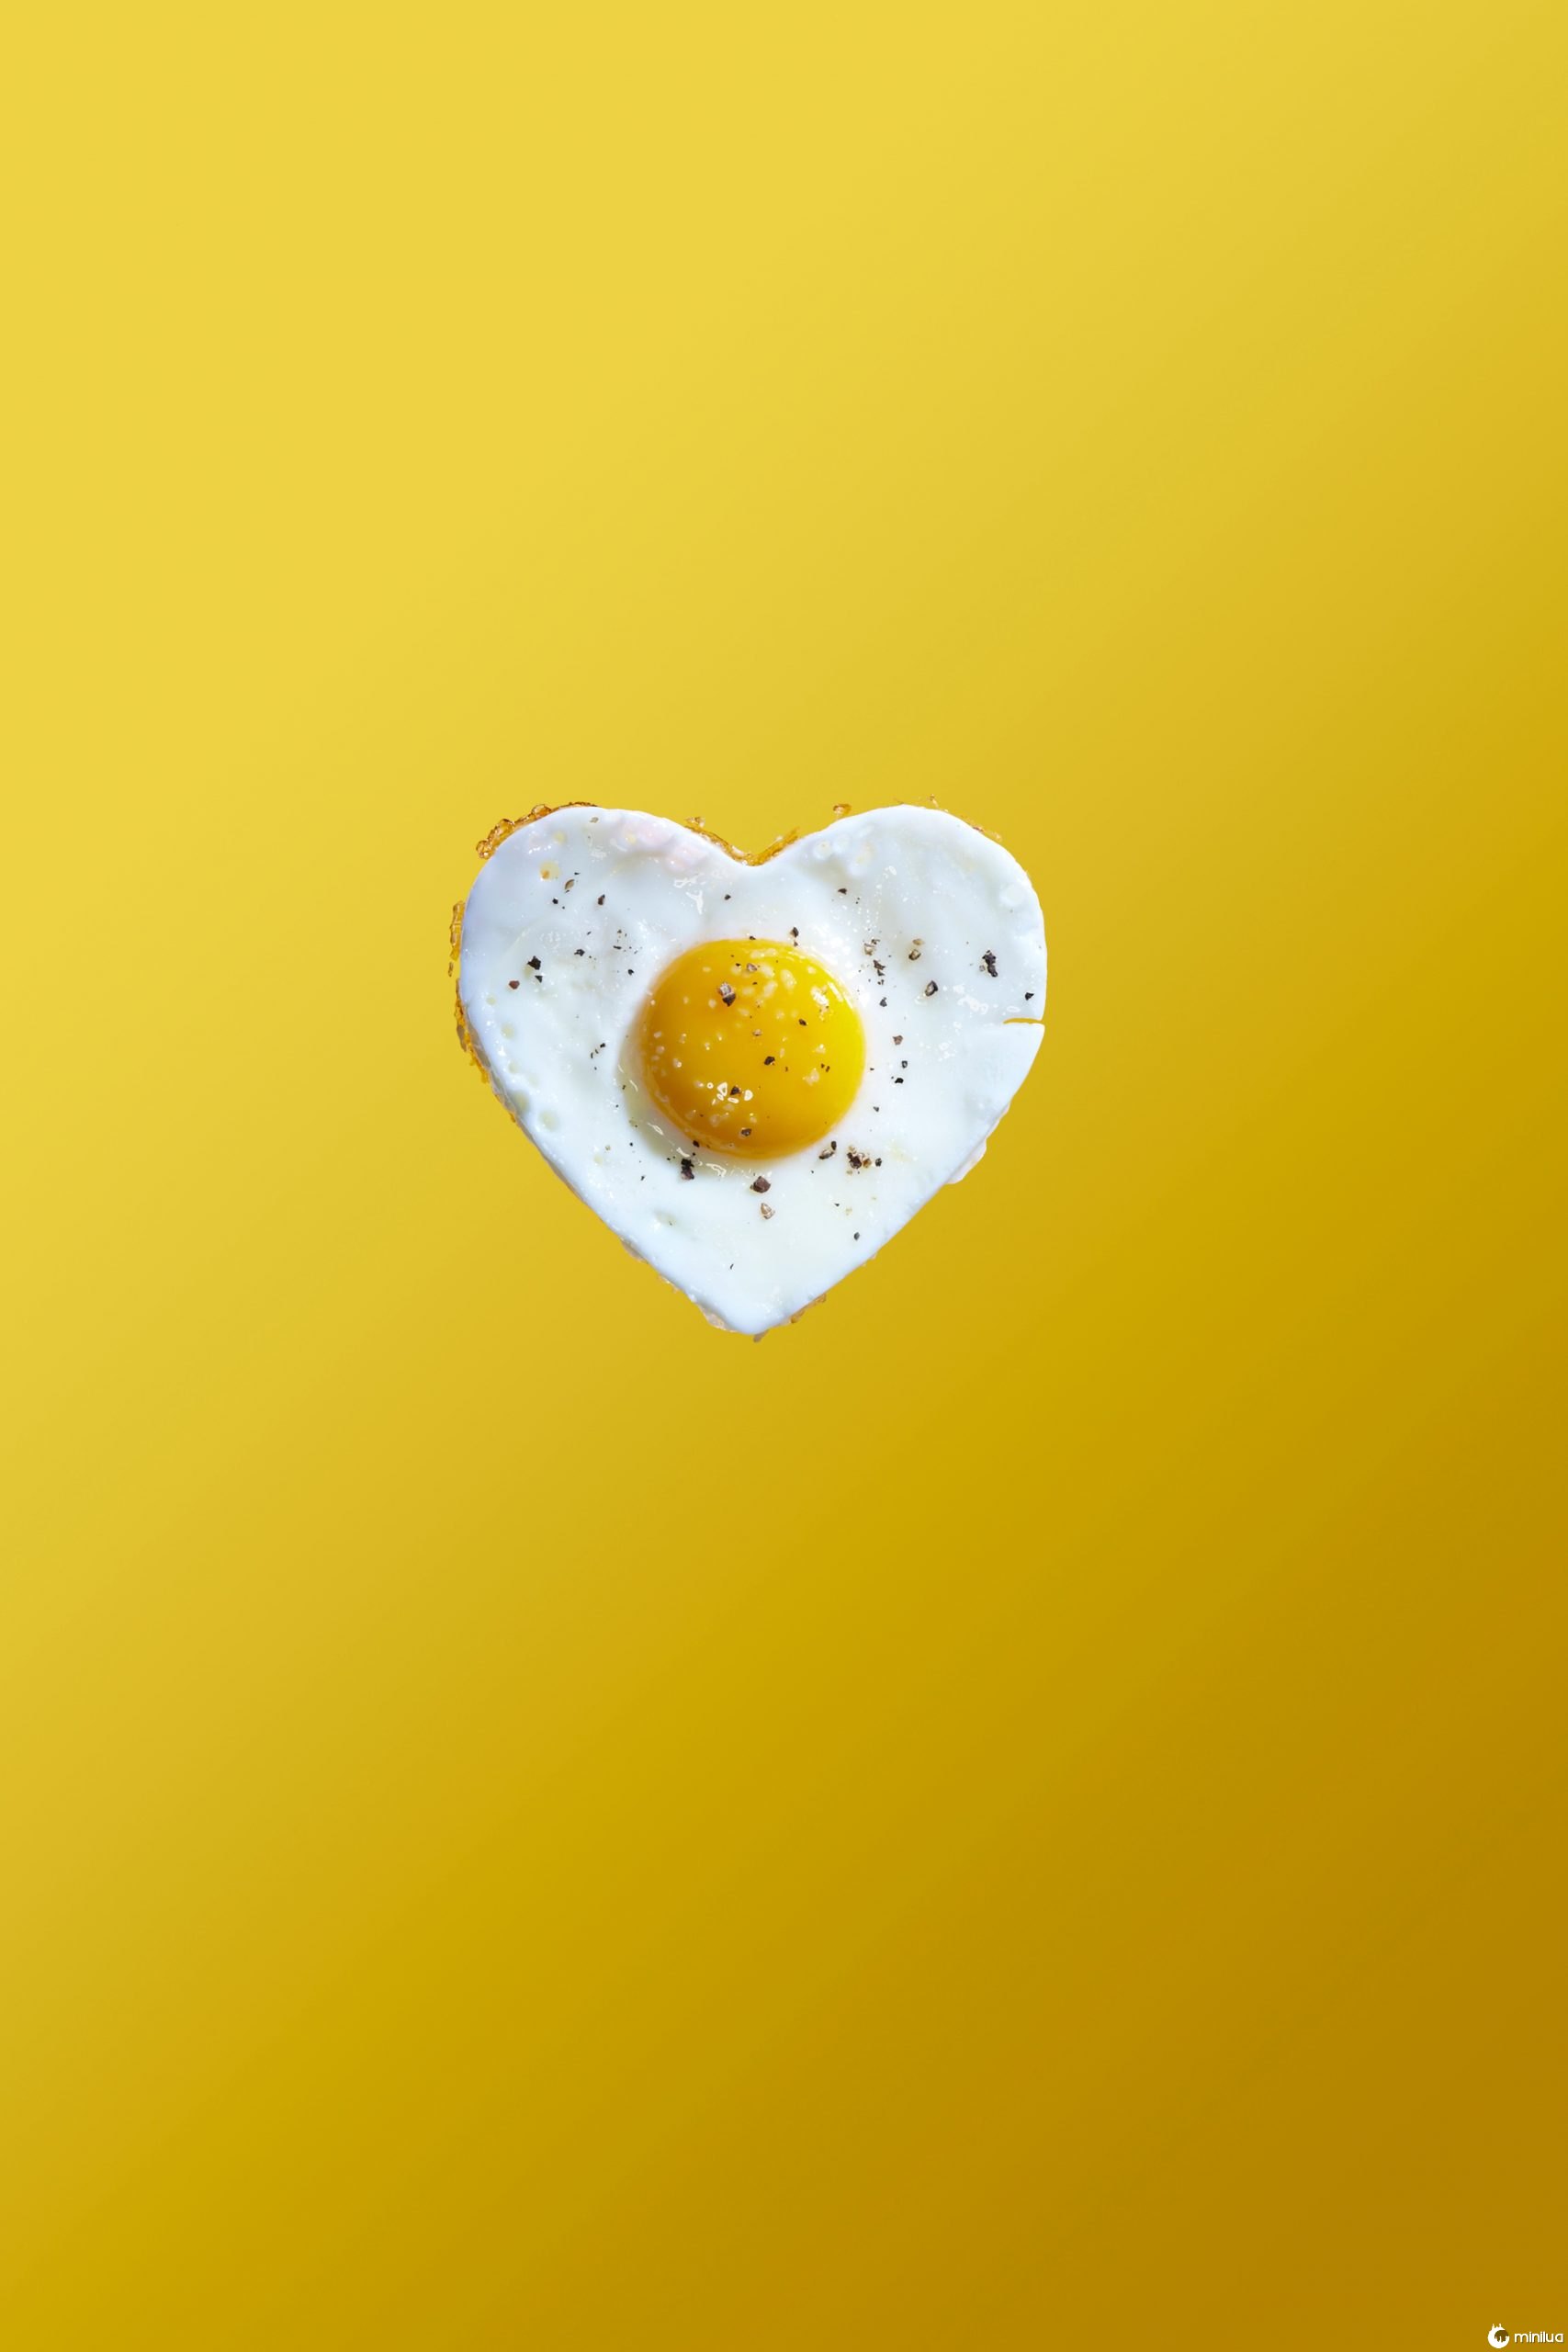 The yolk of one large egg contains nearly <a href="https://fdc.nal.usda.gov/fdc-app.html#/food-details/171287/nutrients">200 milligrams</a> of cholesterol.